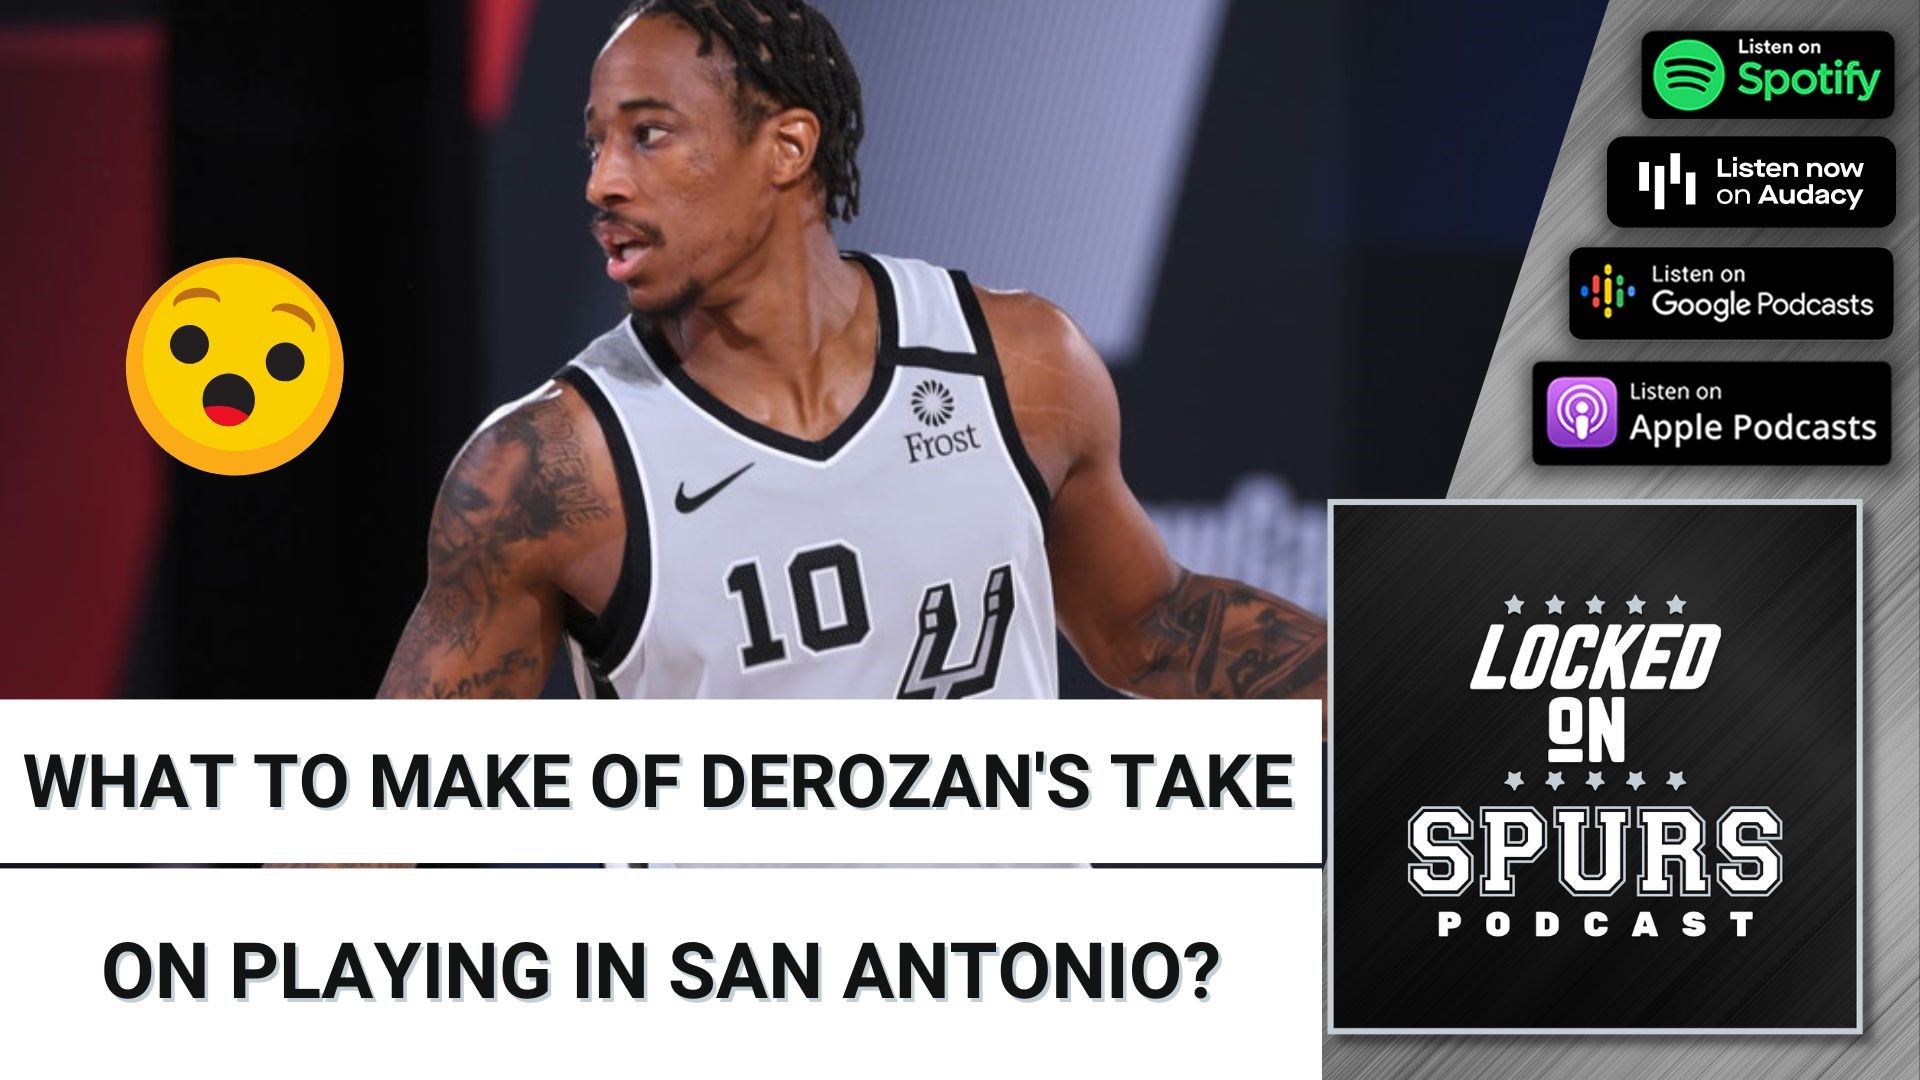 Reacting to what DeRozan had to say about playing in San Antonio.